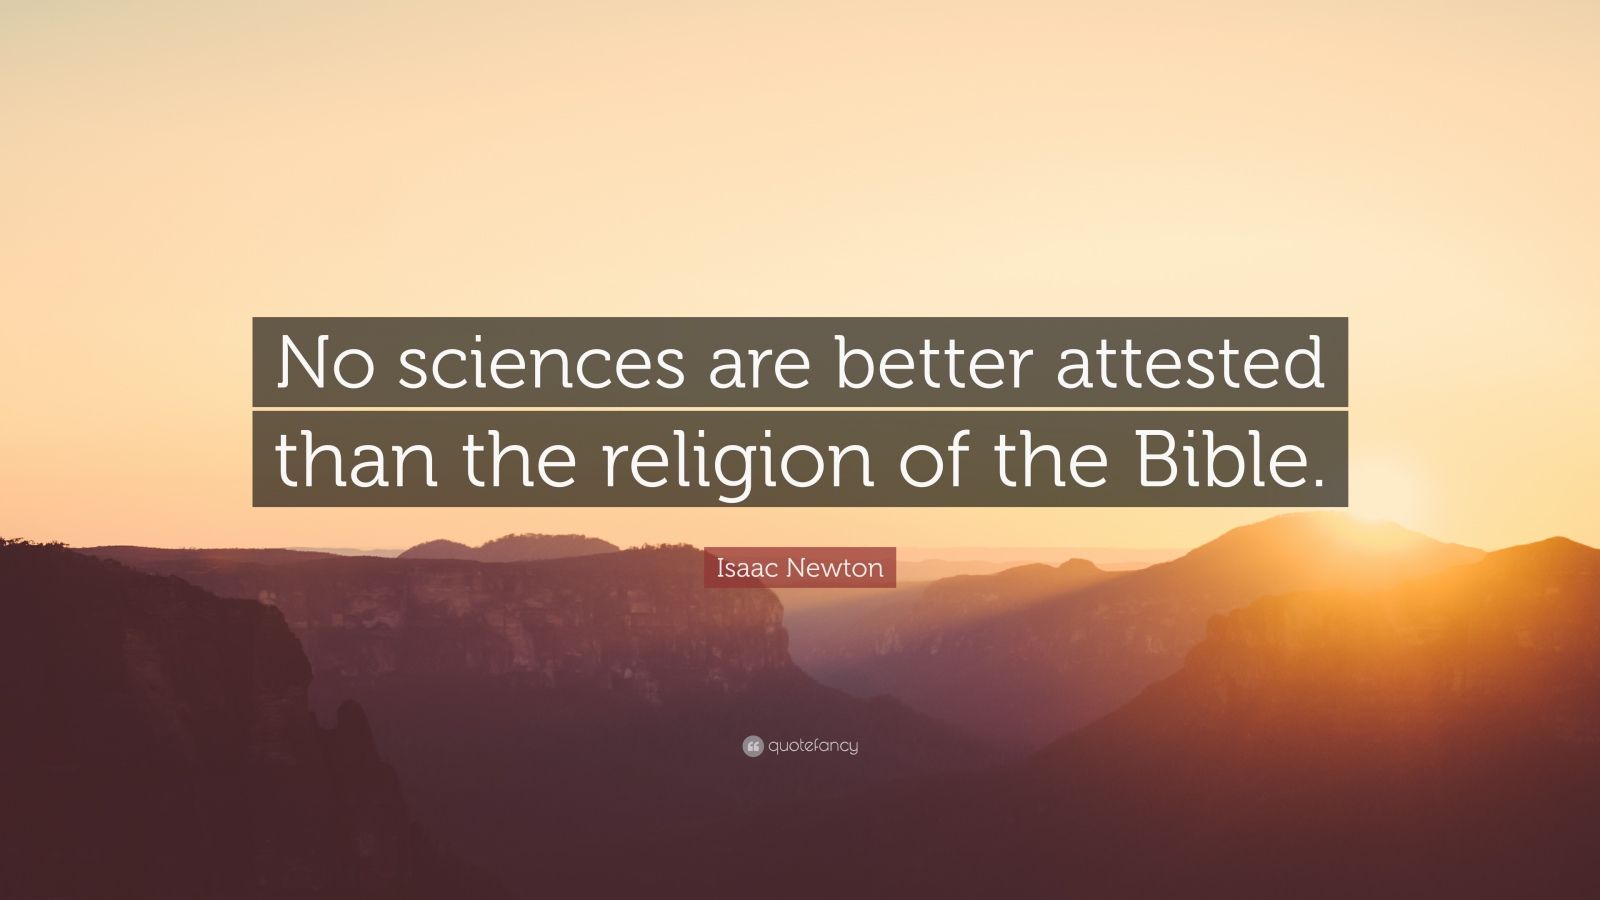 Isaac Newton Quote “no Sciences Are Better Attested Than The Religion Of The Bible” 10 2180